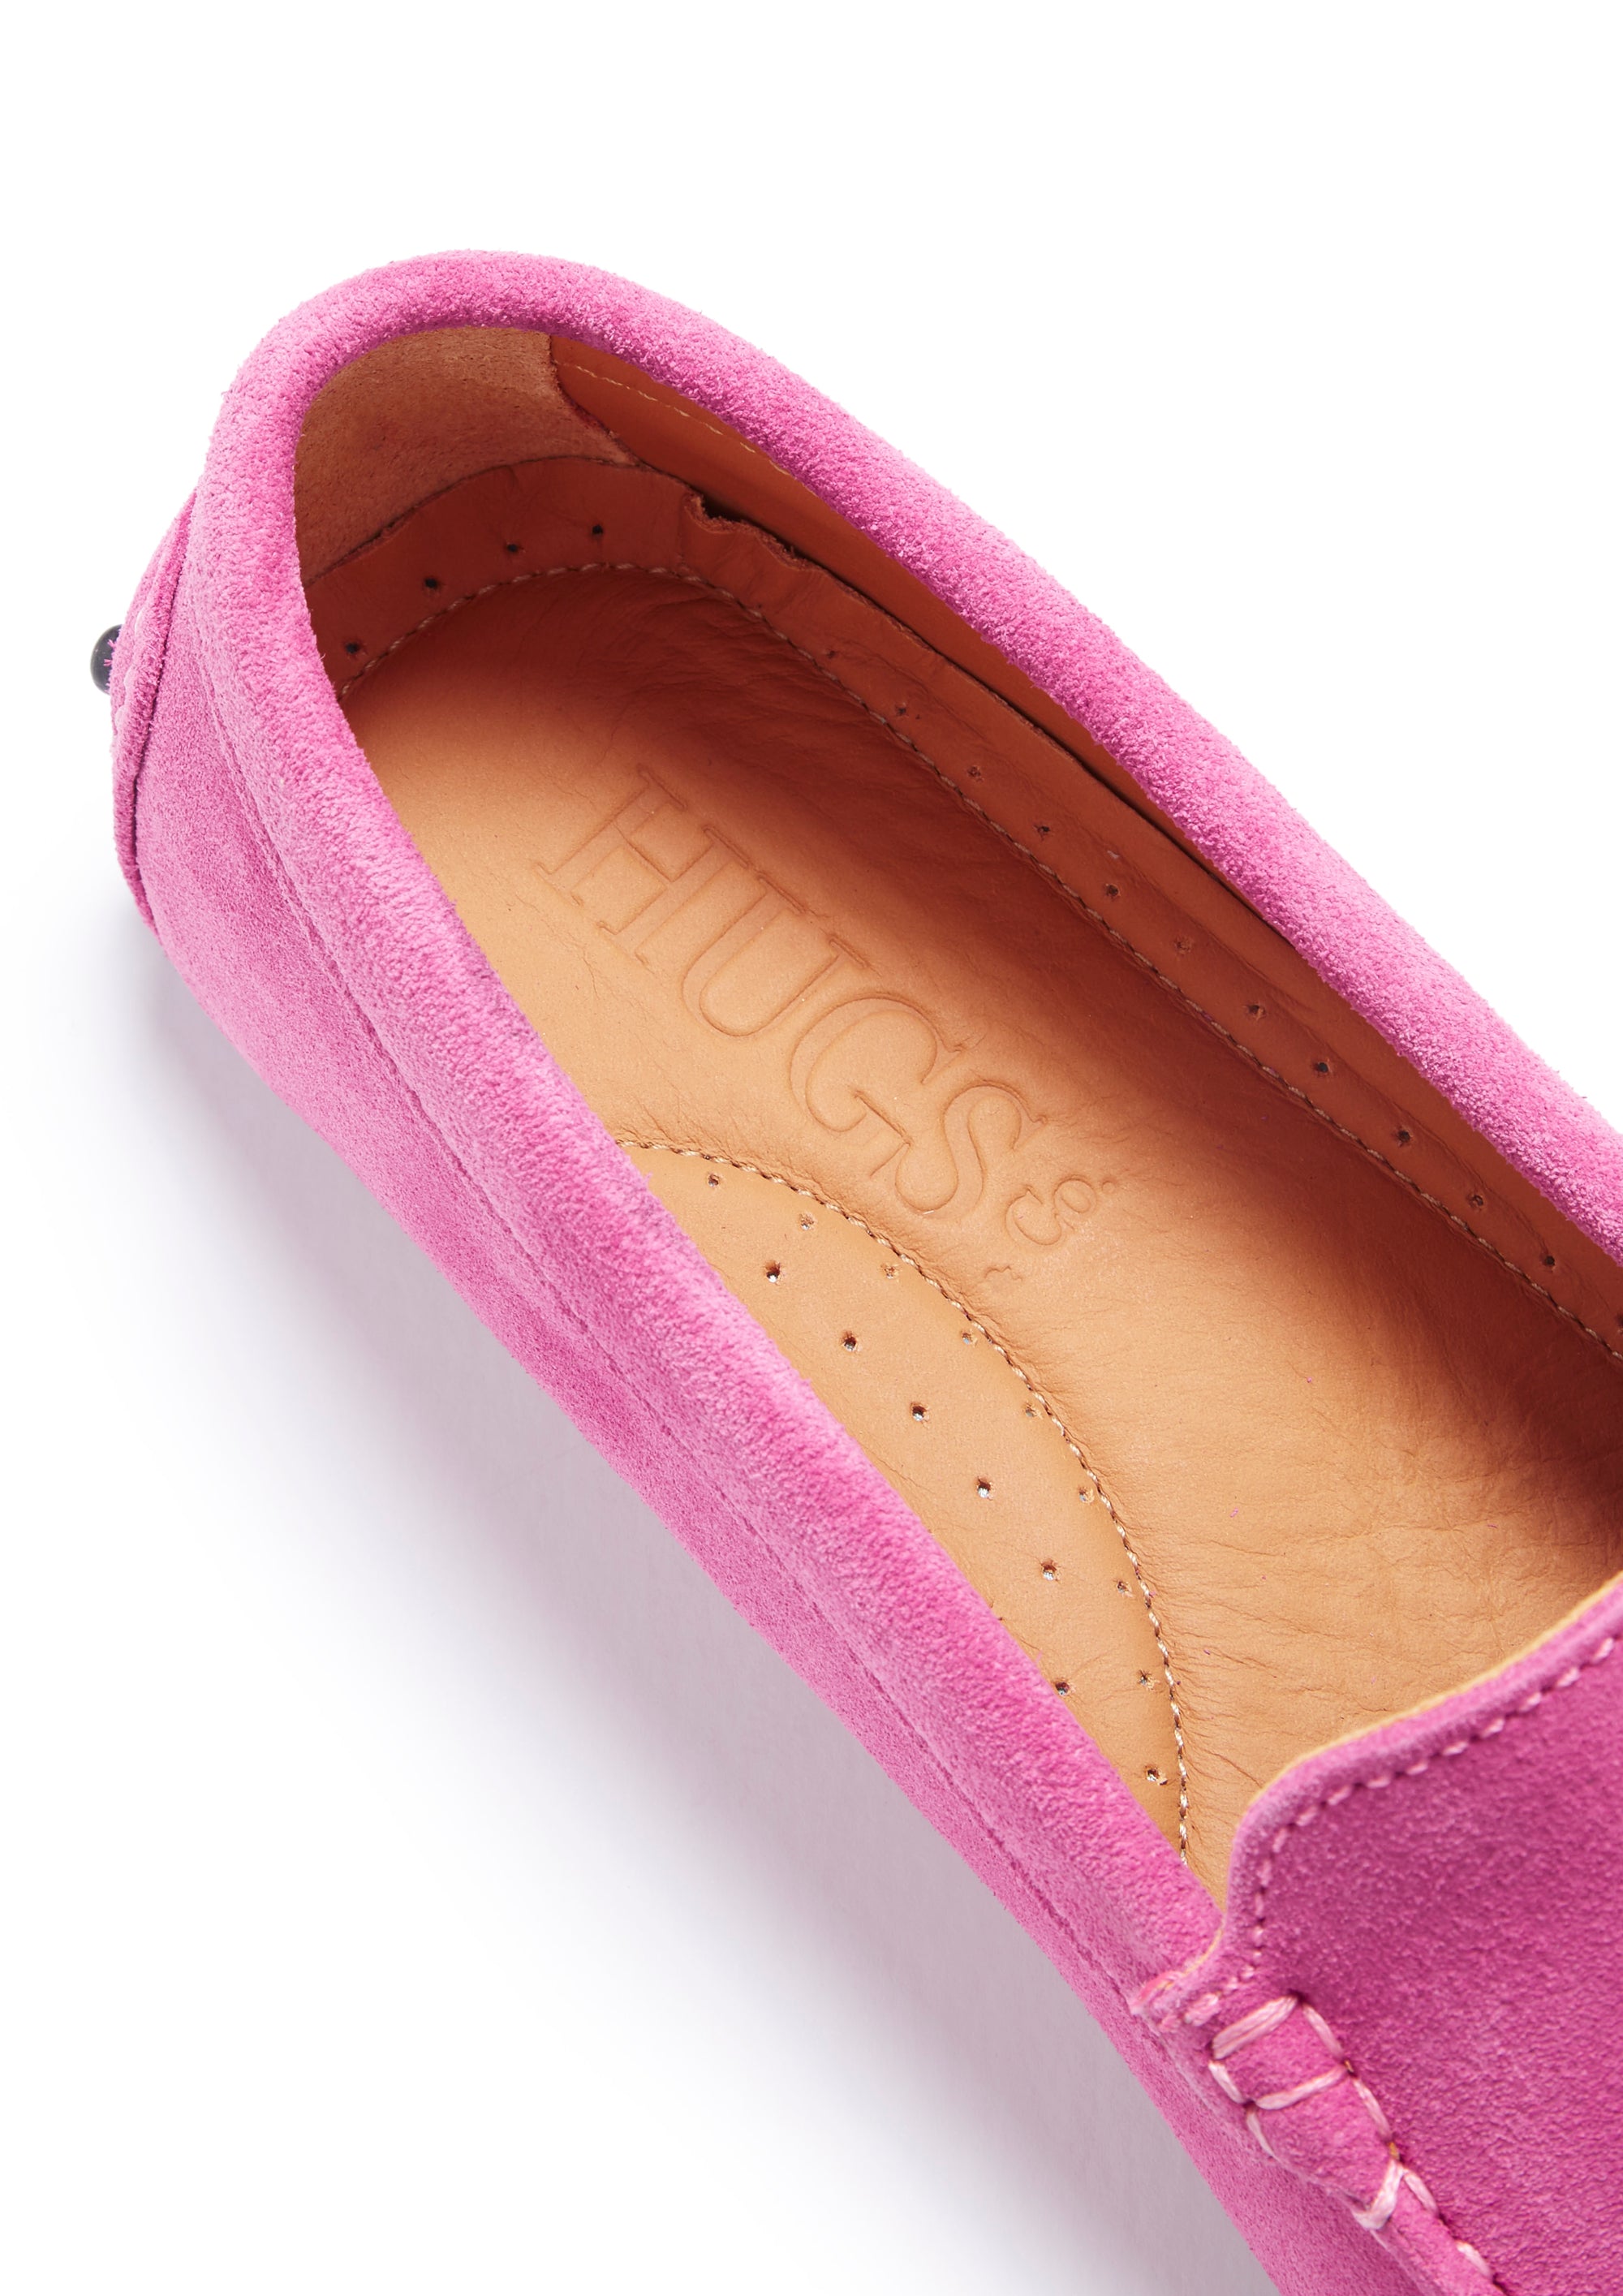 Women's Tasselled Driving Loafers, pink suede